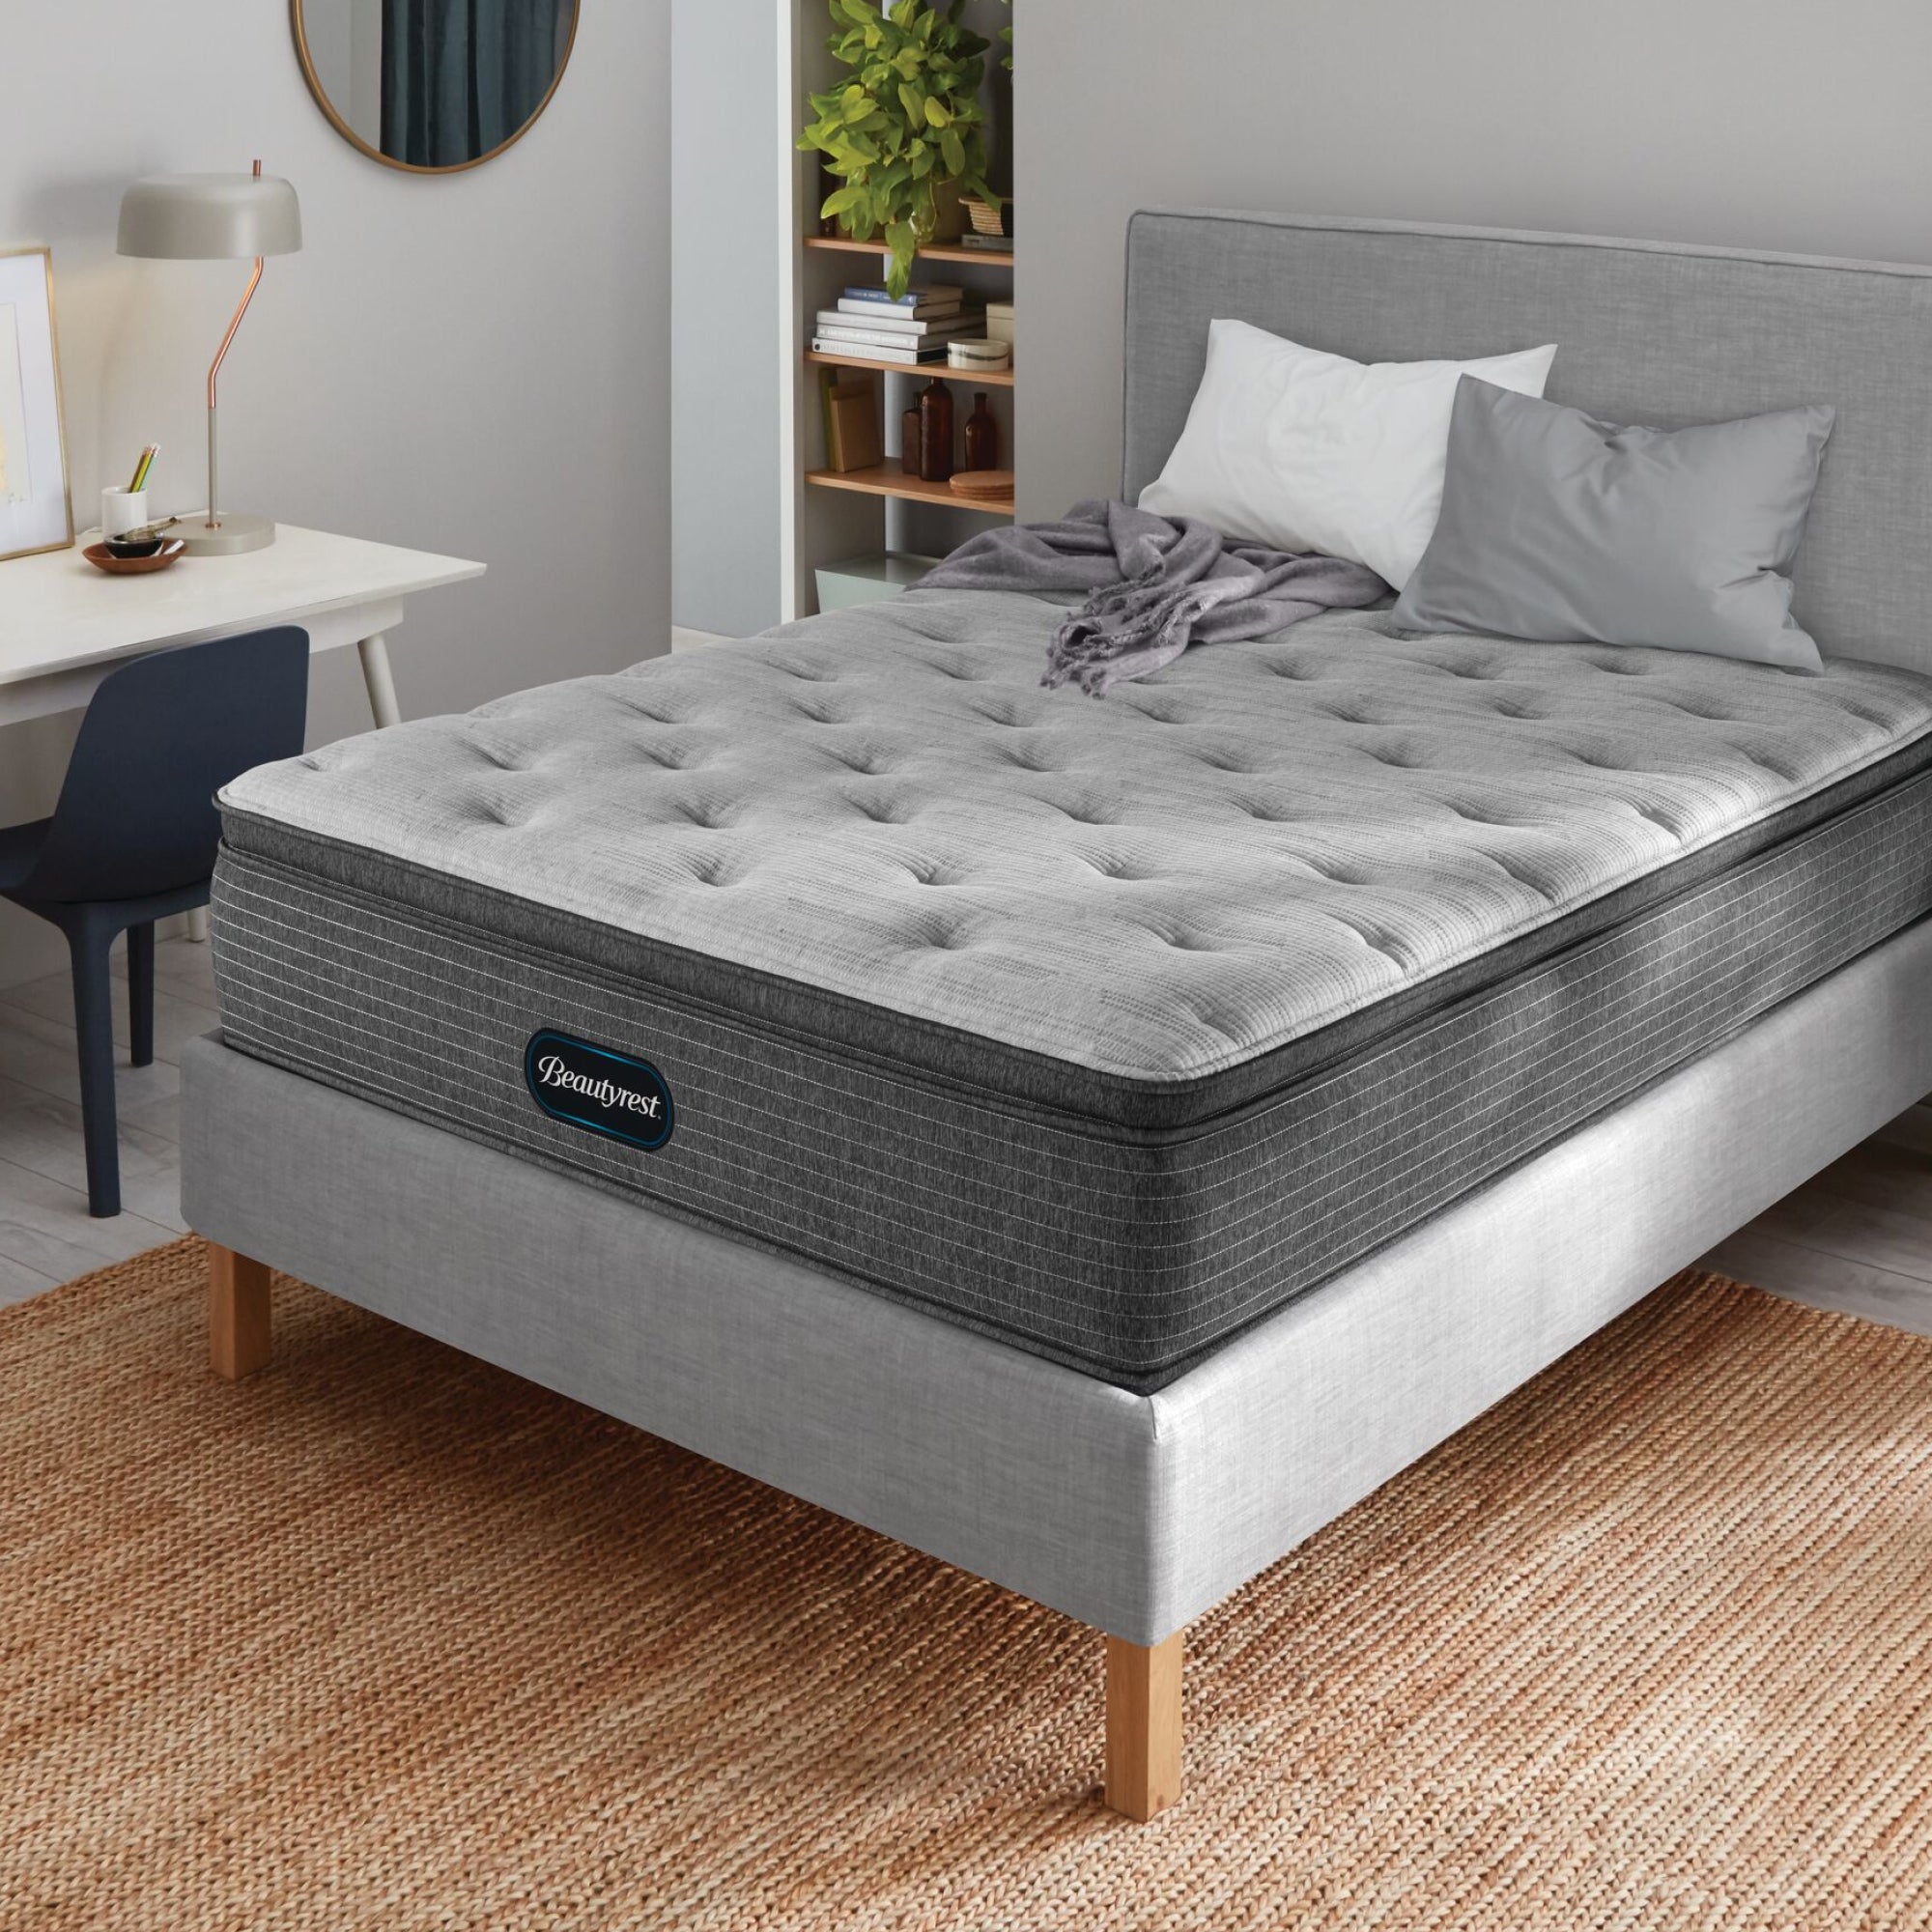 The Beautyrest Select mattress in a bedroom ||feel: Plush Pillow Top